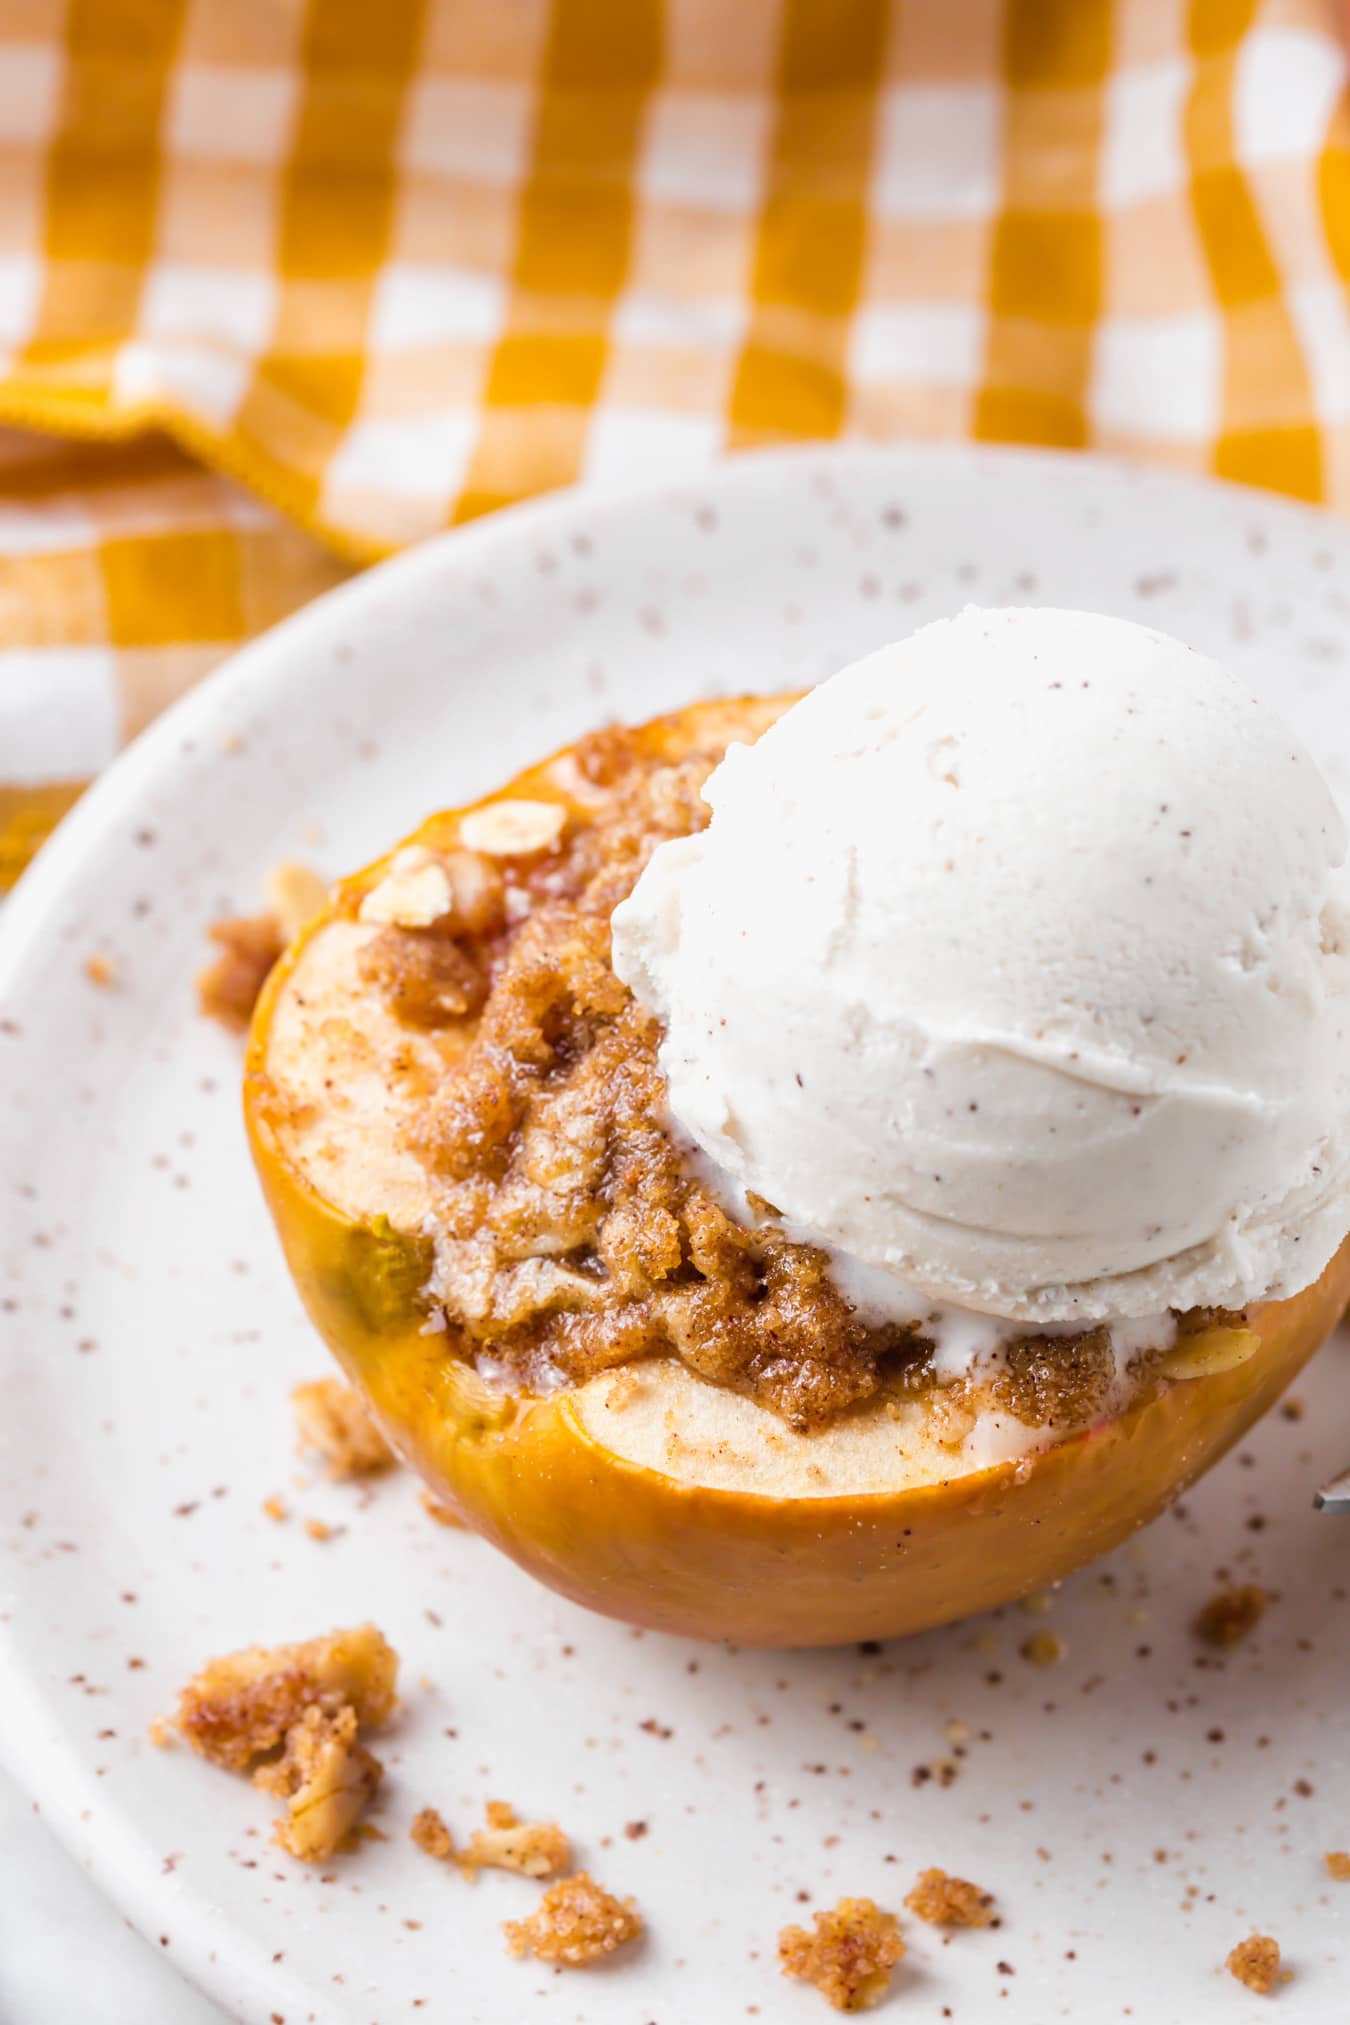 A photo of an apple stuffed with gluten-free streusel and topped with a scoop of ice cream.